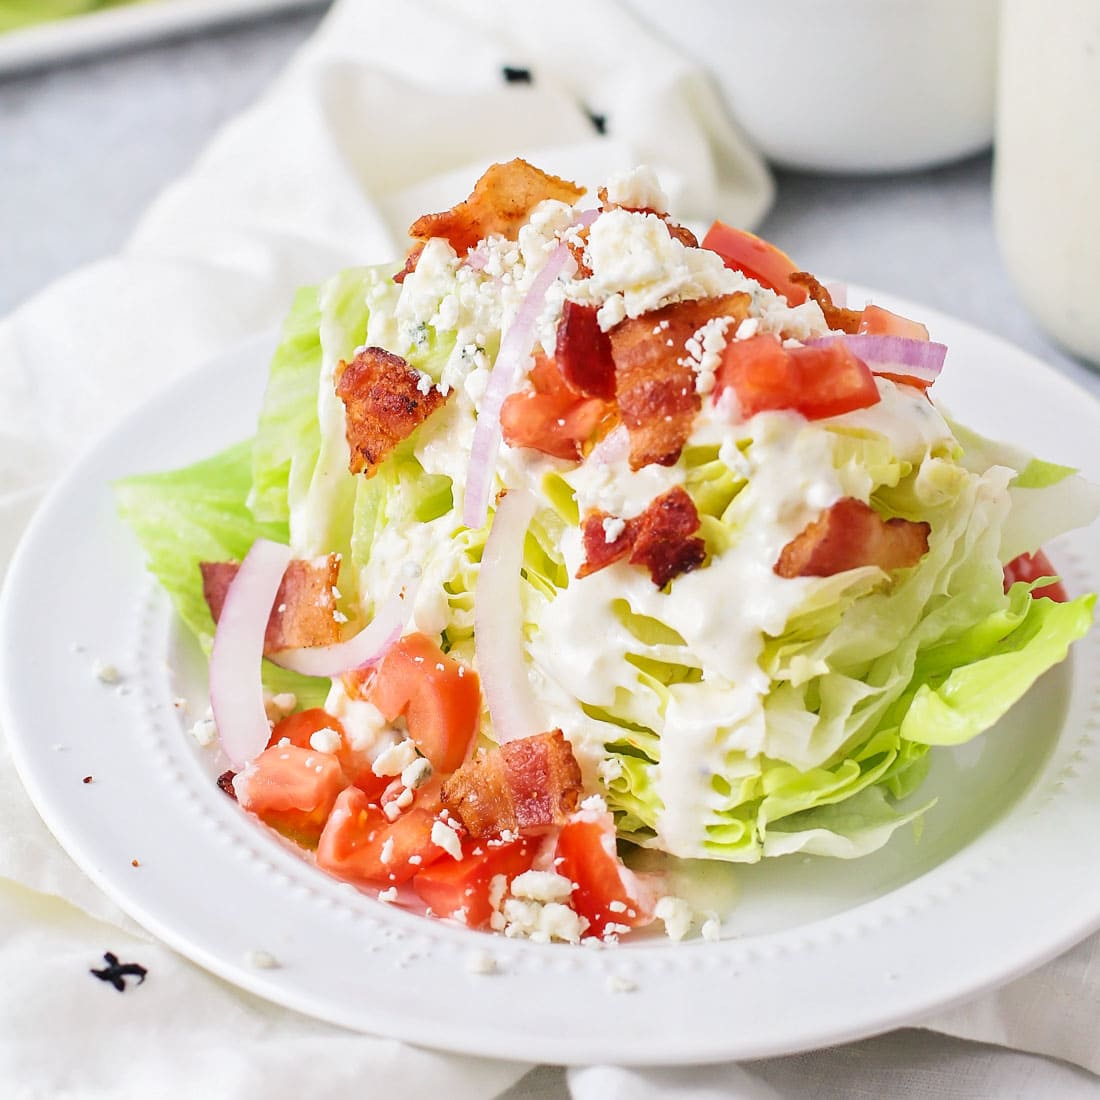 Wedge Salad served on a white plate